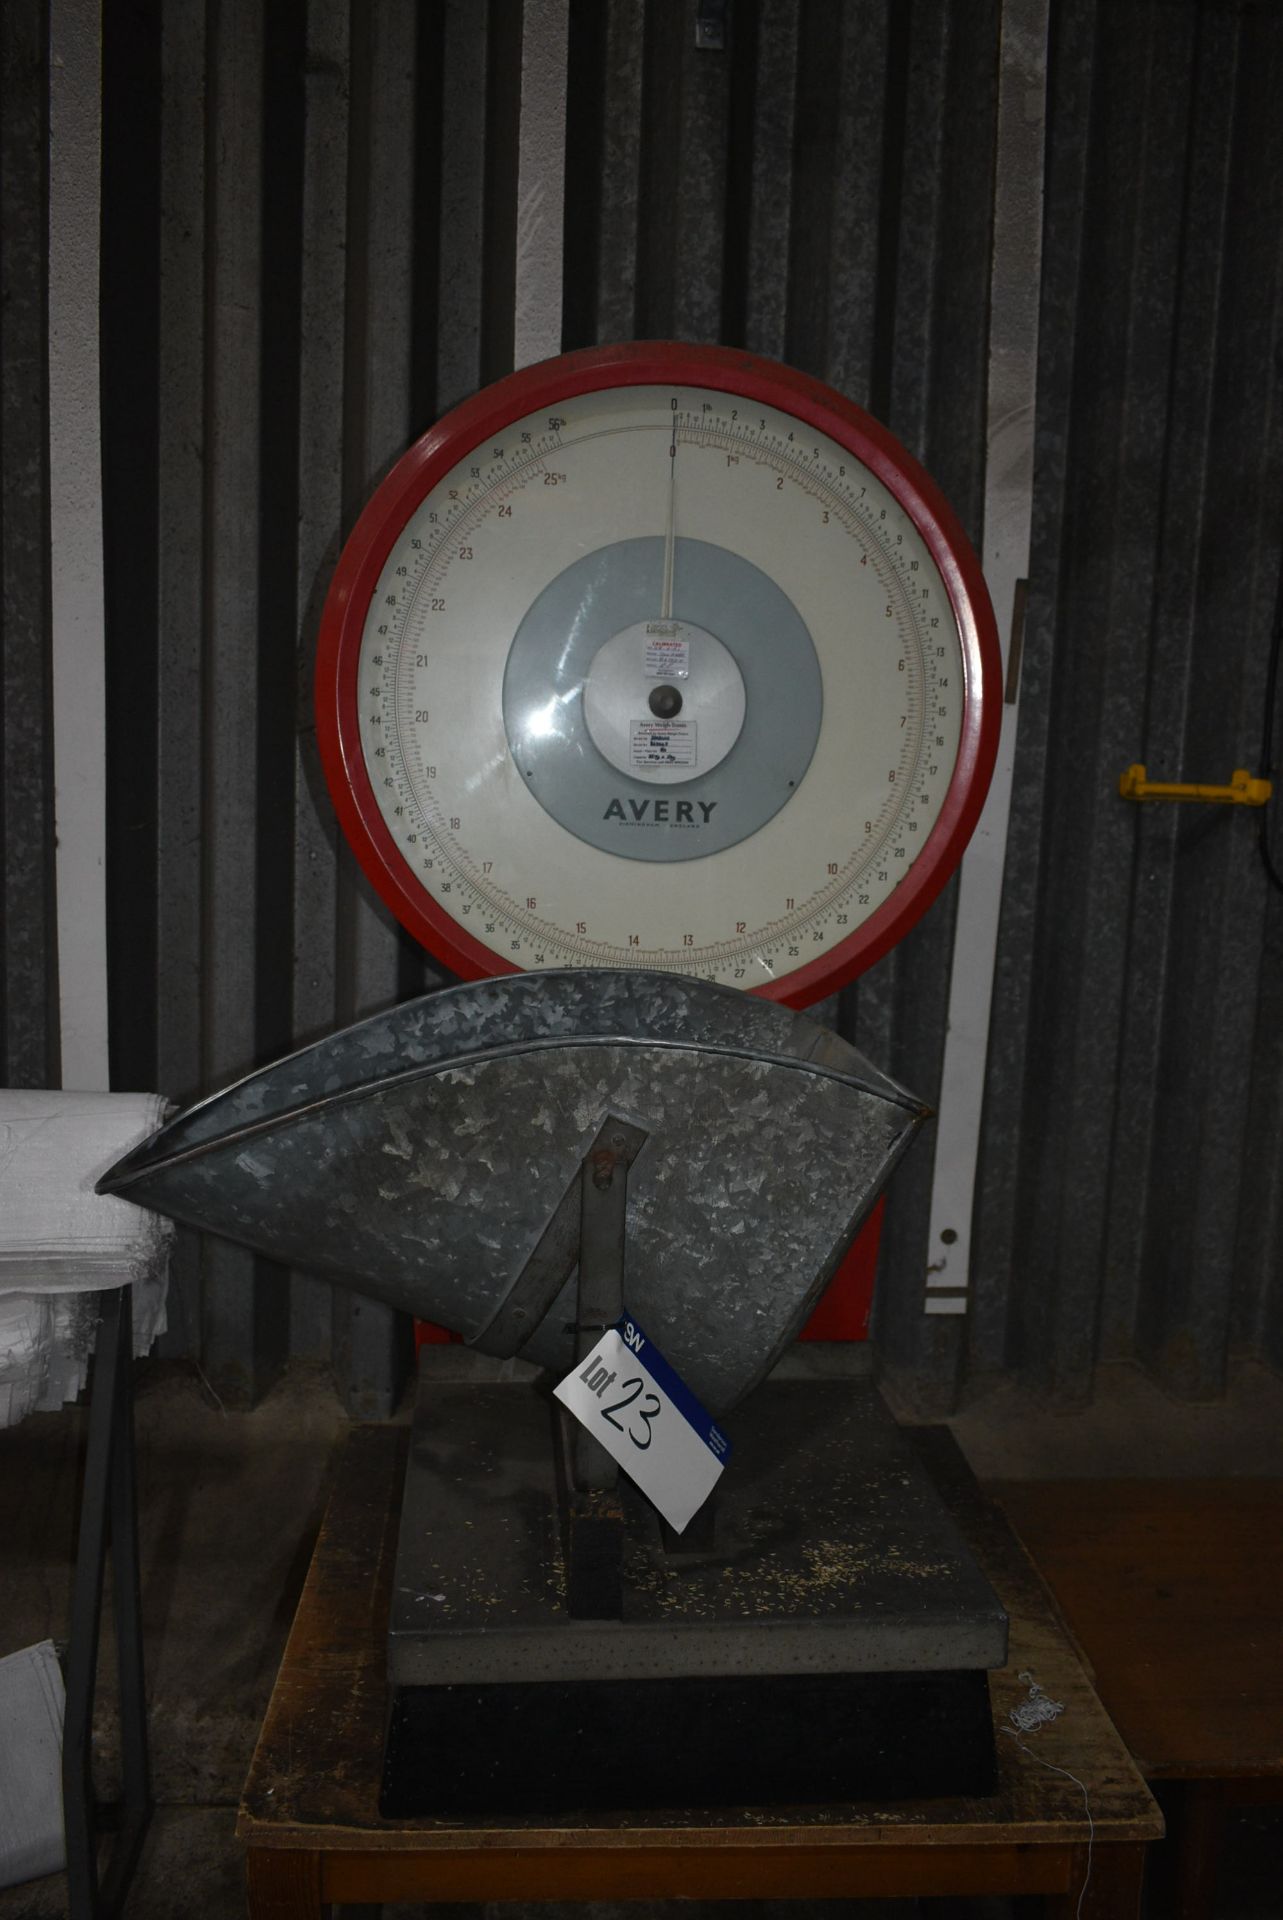 Avery 3303COS 25kg Dial Indicating Bench Weighing